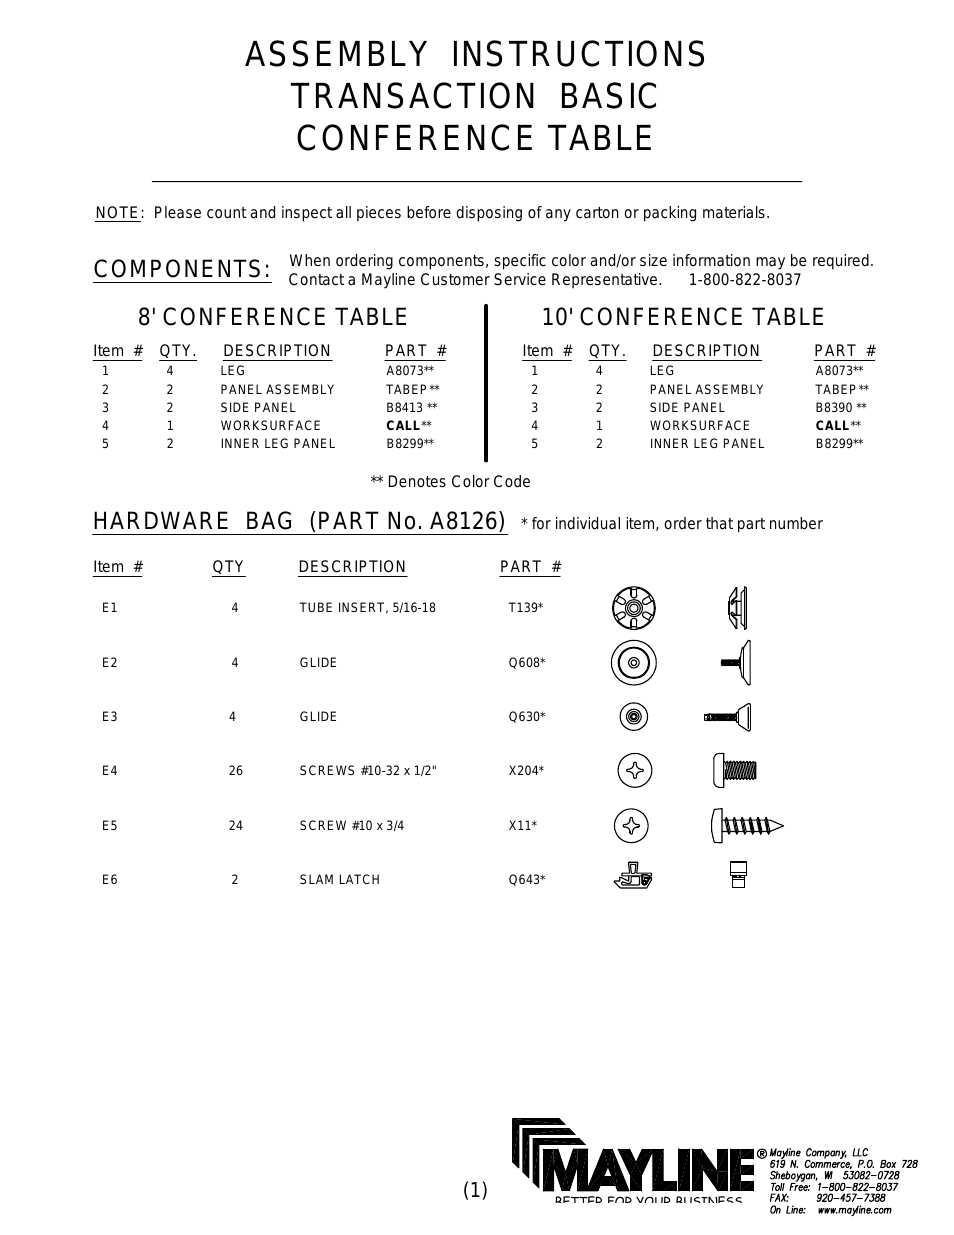 10' Basic Conference Table